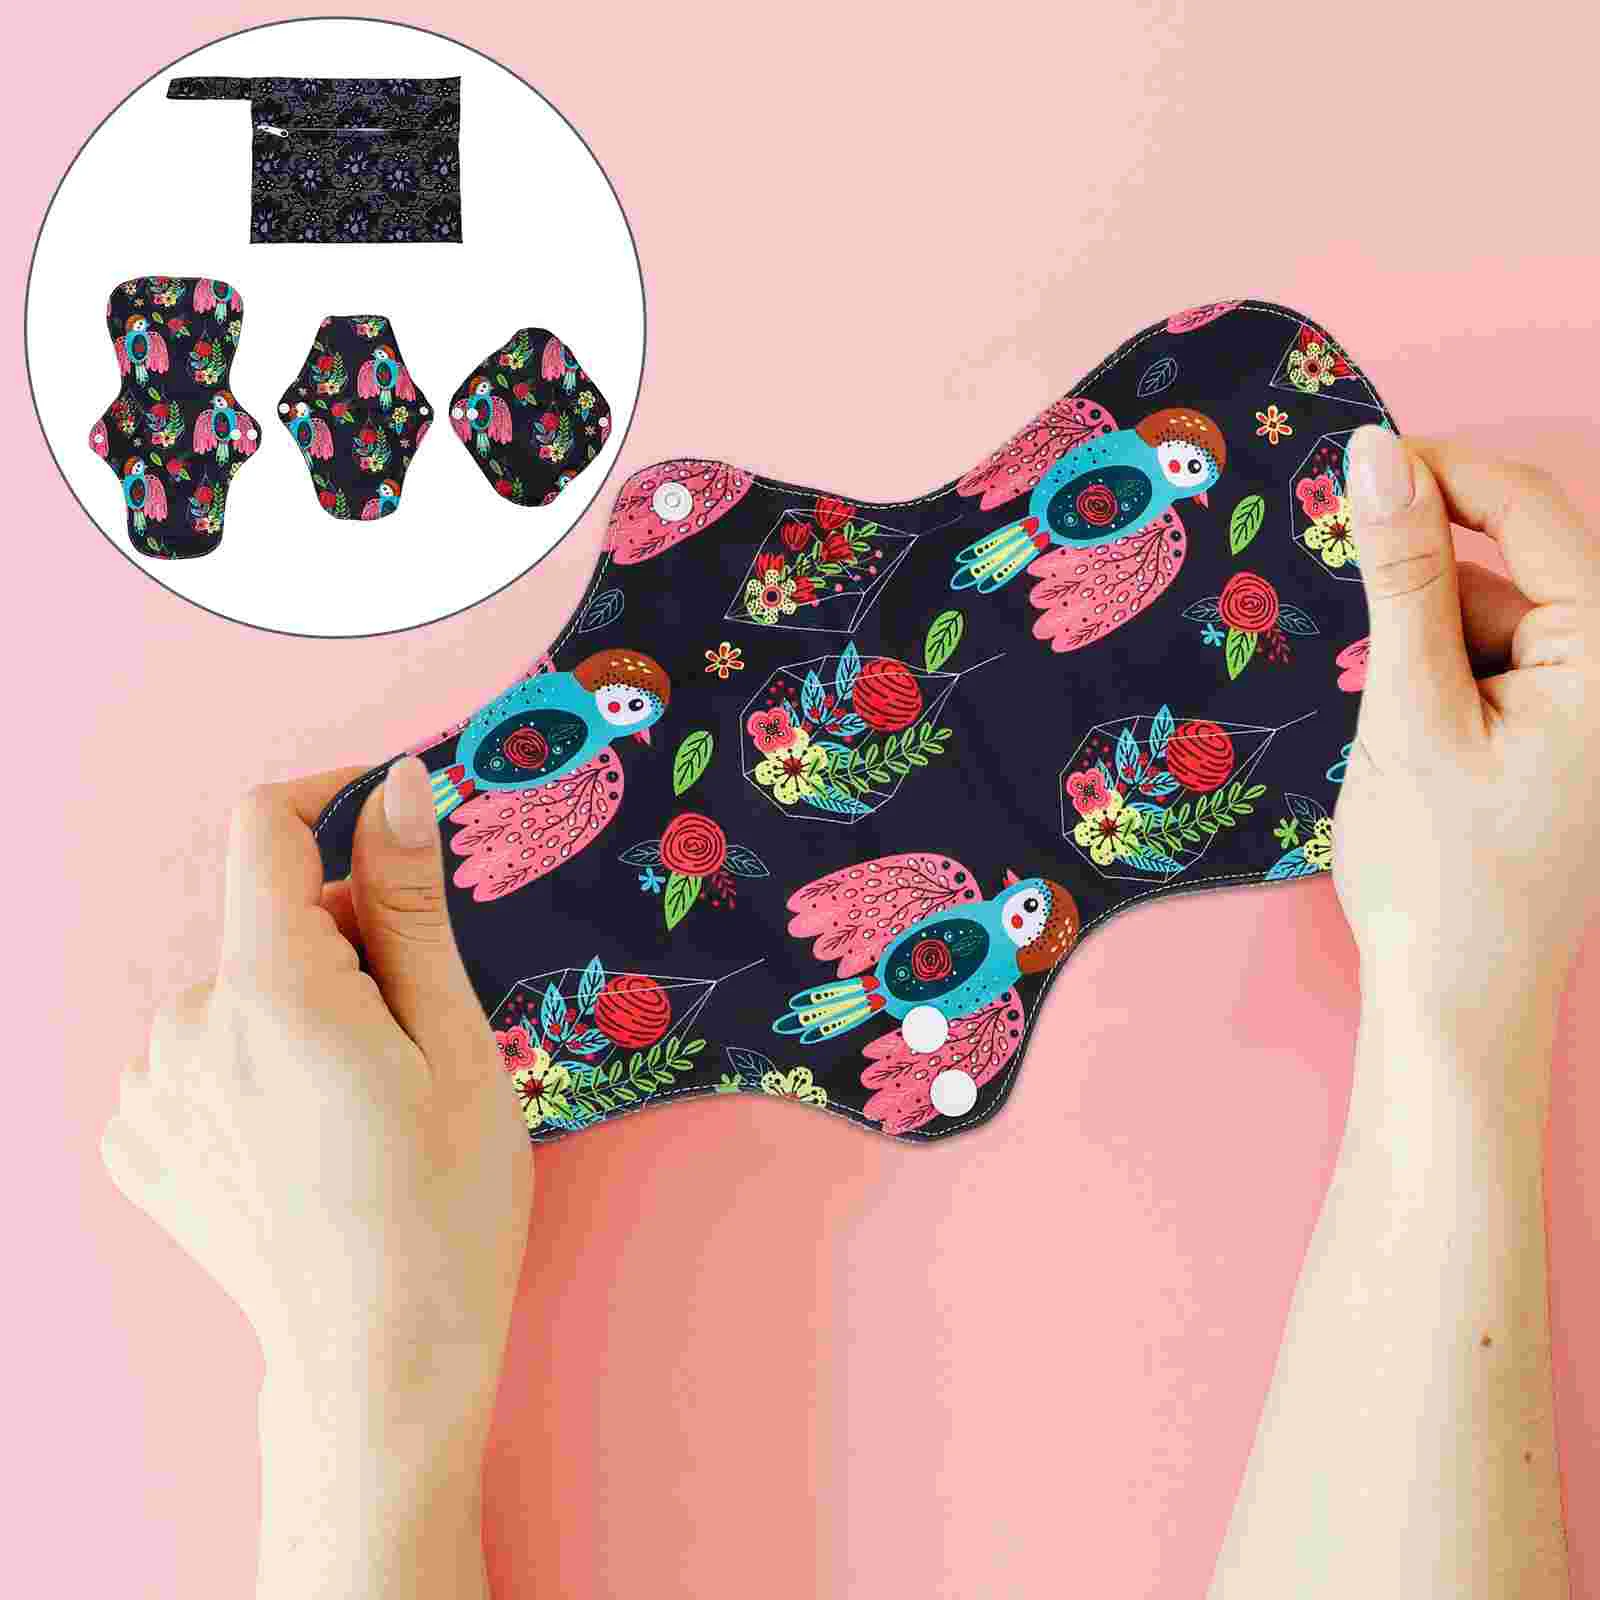 

Pads Reusable Sanitary Cloth Period Washable Menstrual Napkin Pad Panty Liners Heavy Flow Overnight Charcoal Incontinence